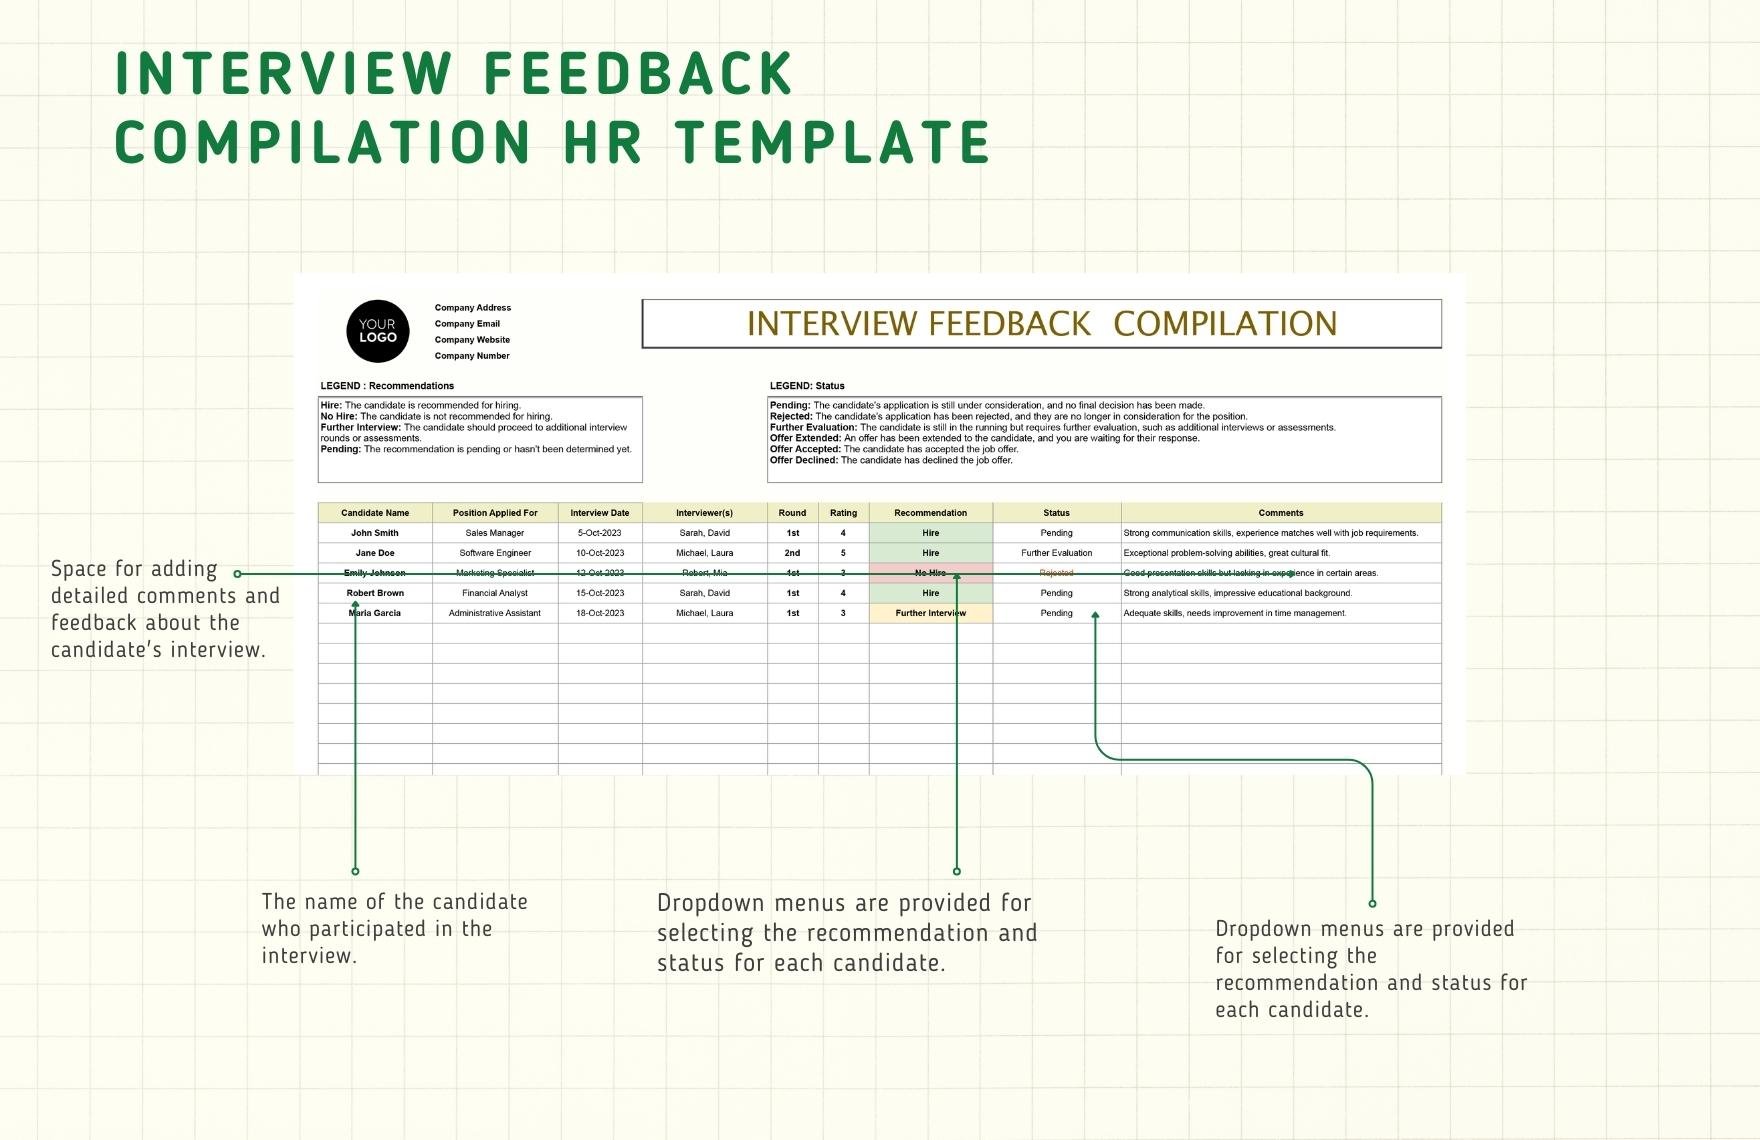 Interview Feedback Compilation HR Template